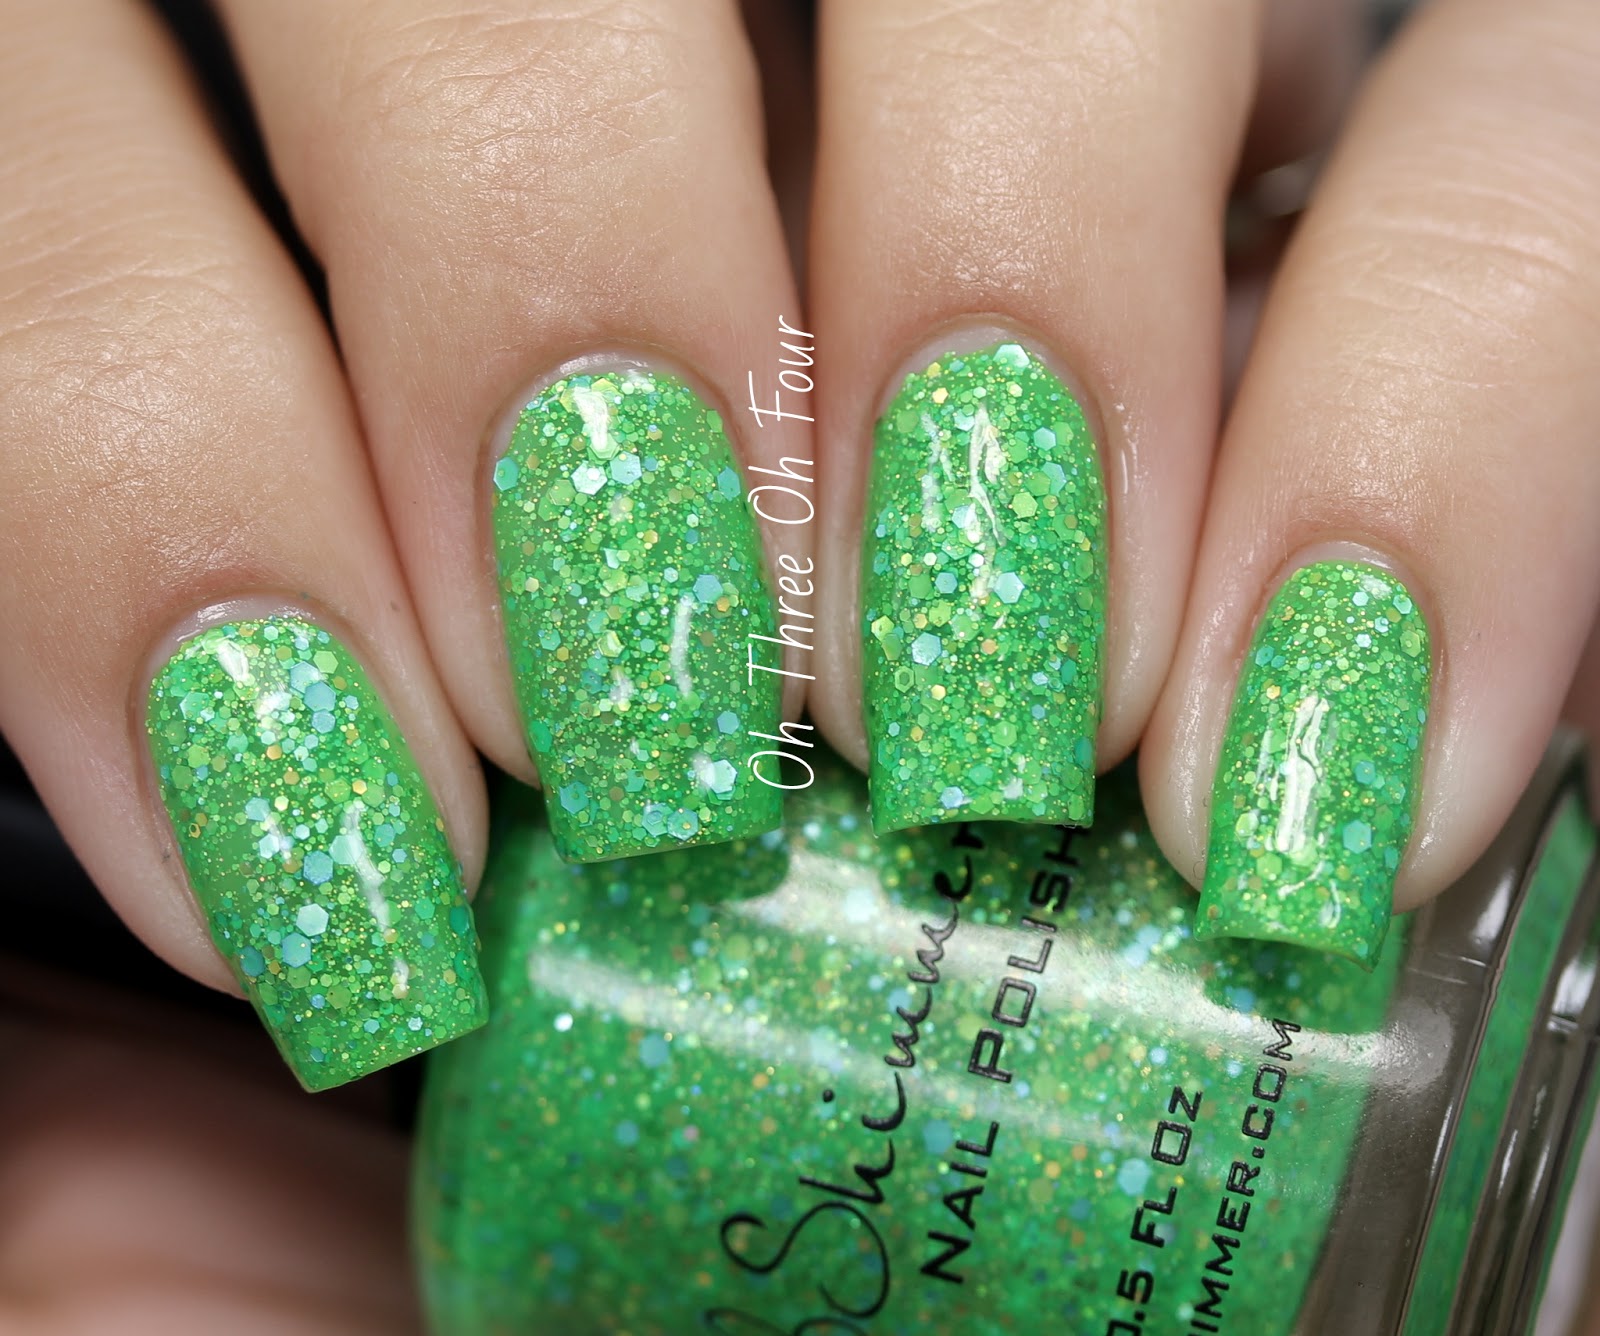 KBShimmer Partners in Lime Swatch